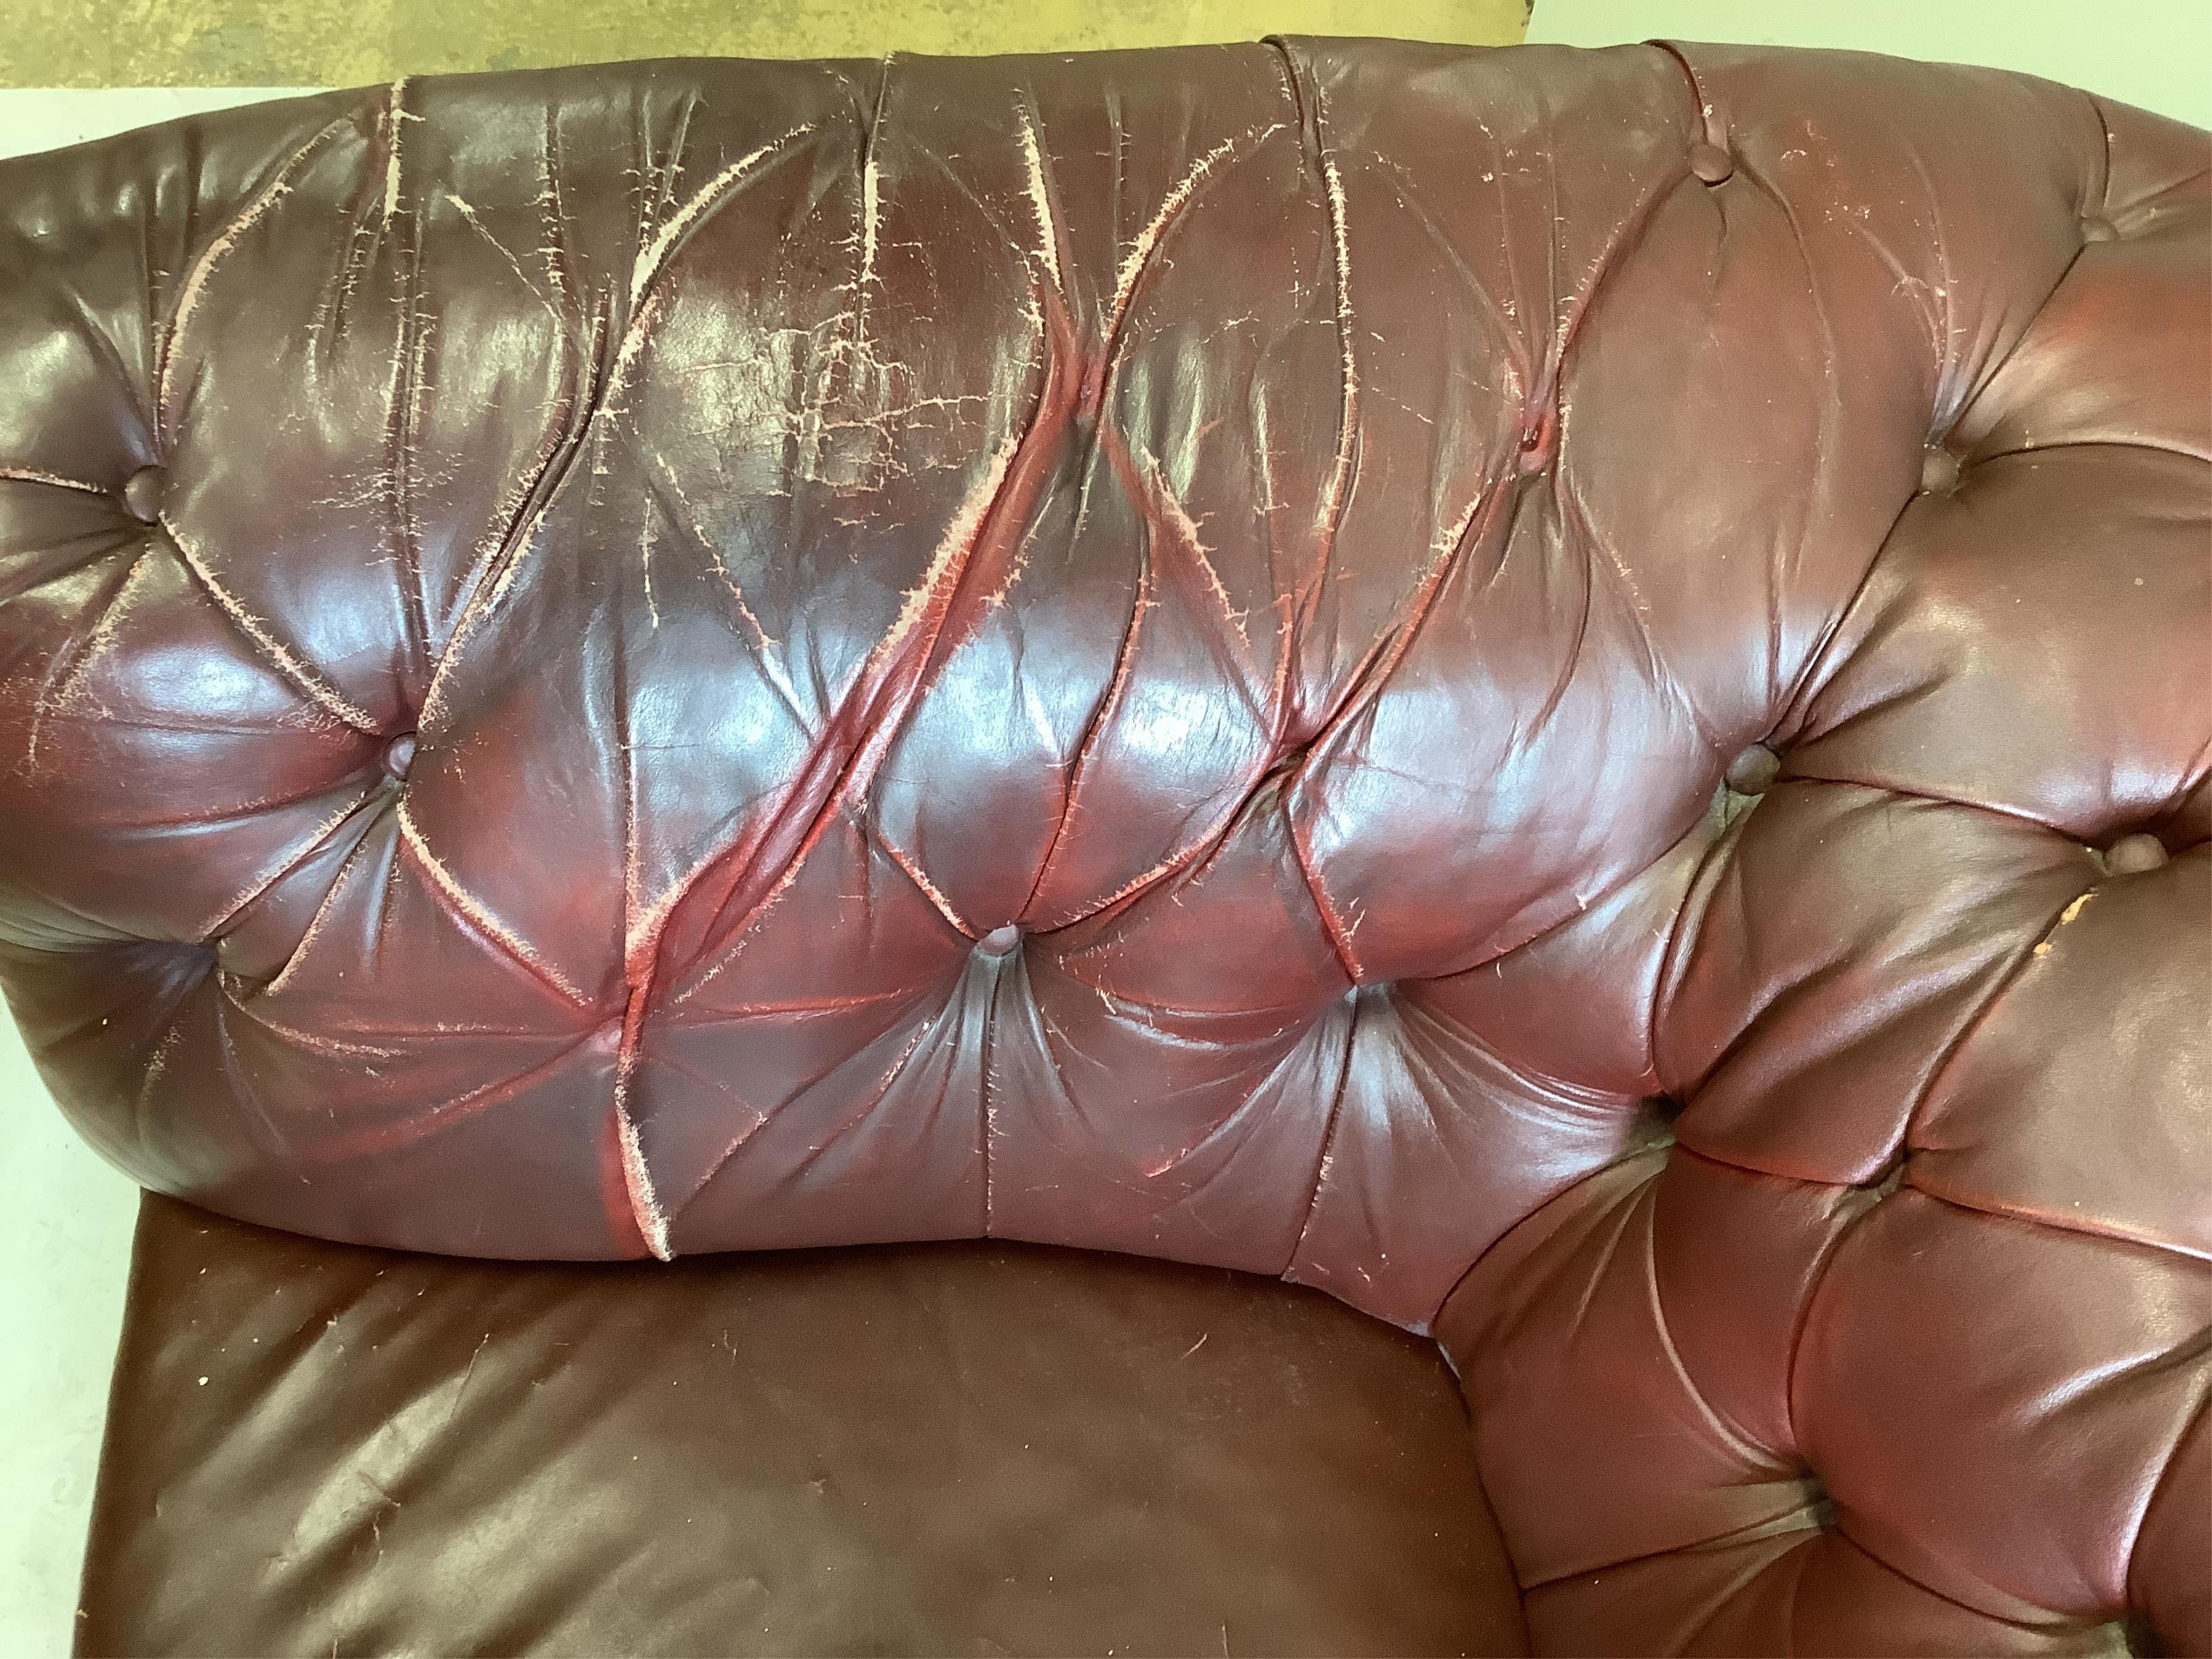 An early 20th century buttoned burgundy leather Chesterfield settee, width 165cm, depth 84cm, height 85cm. Condition - poor